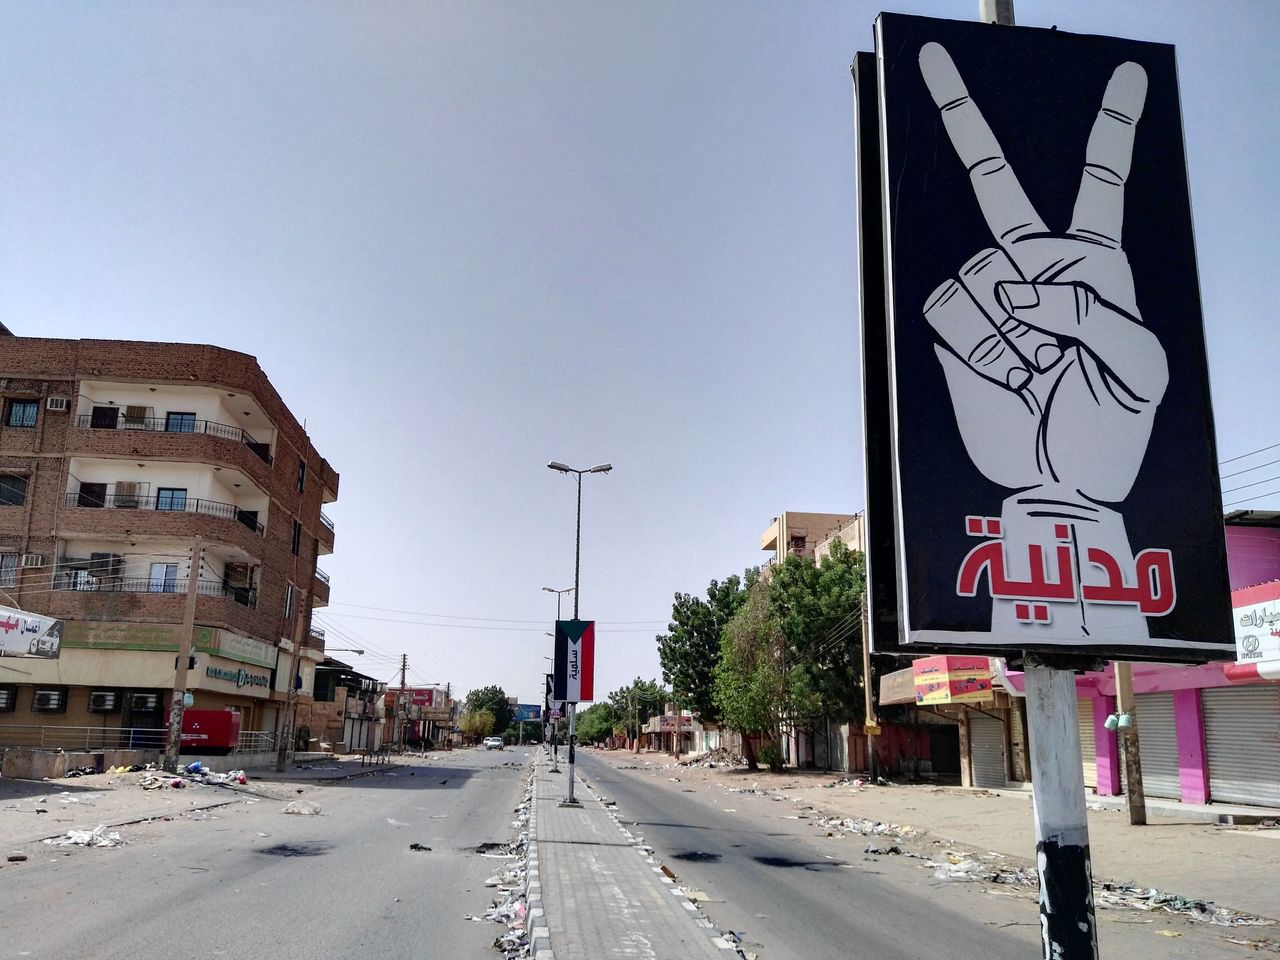 The U.S. has been slow to involve itself in the crisis, while other nations attempt to broker peace. A placard on Street 60 in a nearly deserted Khartoum on June 6 reads: "Civilian and peaceful."